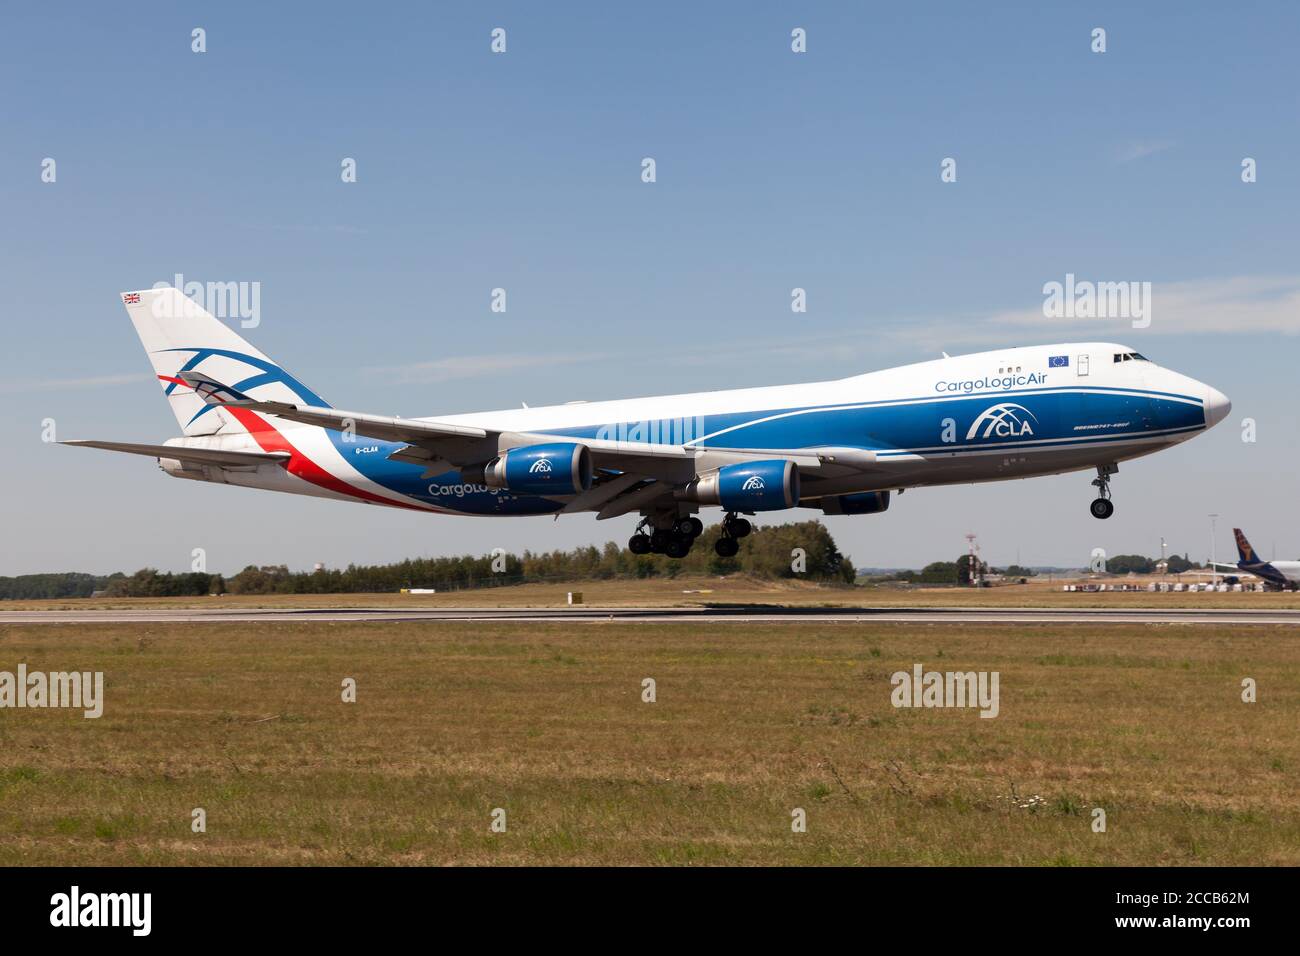 Liege, Belgium. 30th July, 2020. A Cargo Logic Air Boeing 747-400 freighter about to land at Liege Bierset airport. Credit: Fabrizio Gandolfo/SOPA Images/ZUMA Wire/Alamy Live News Stock Photo